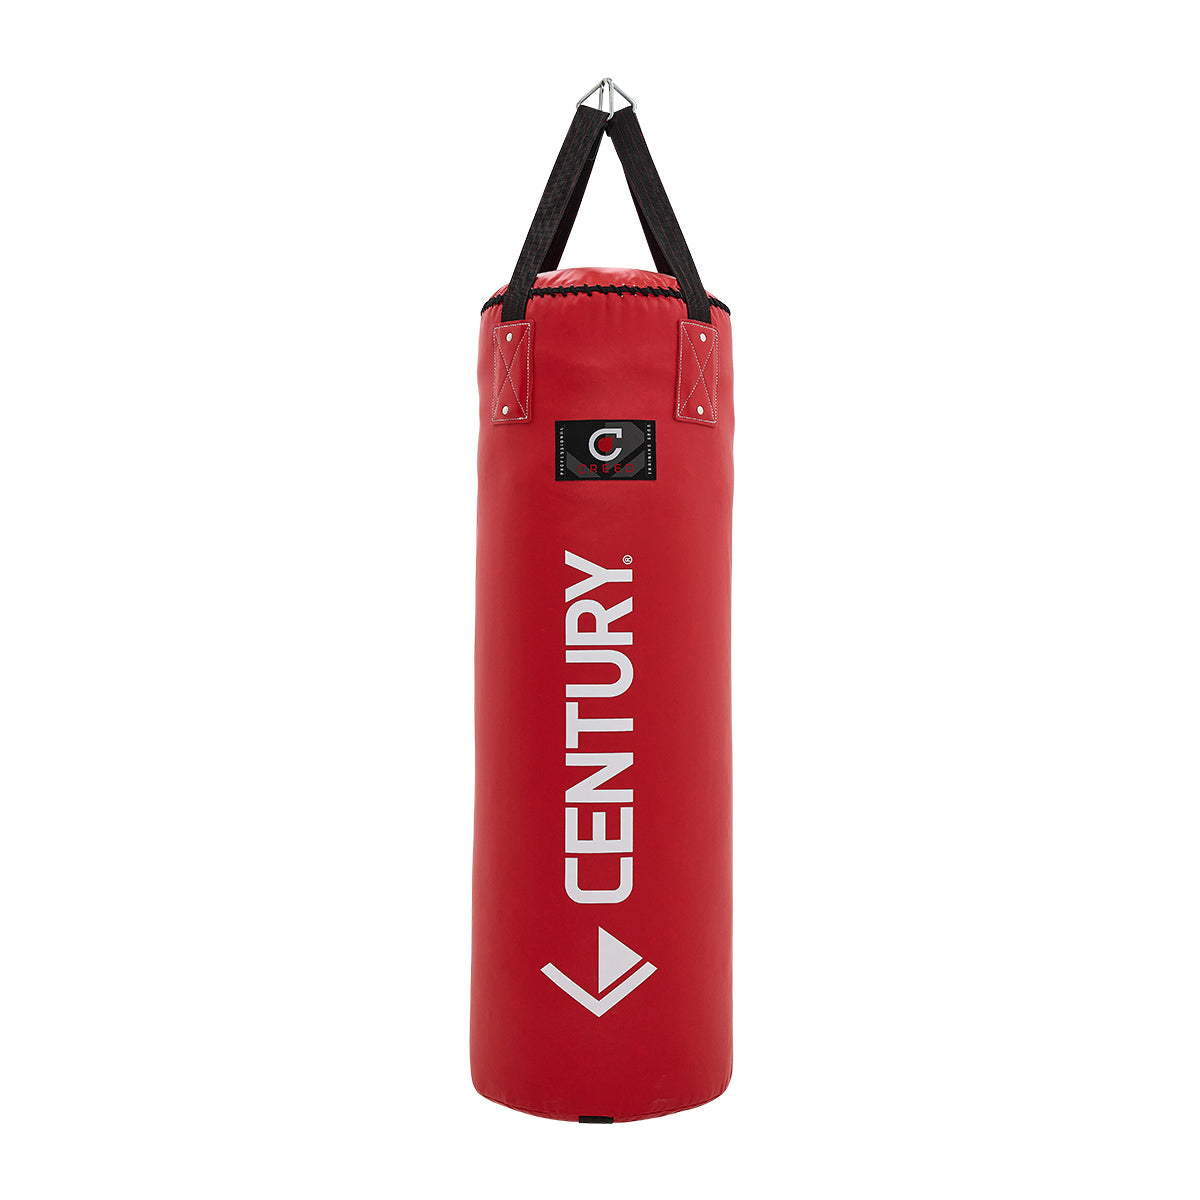 CREED 100 lb. Foam Lined Heavy Bag 100 lbs. Red